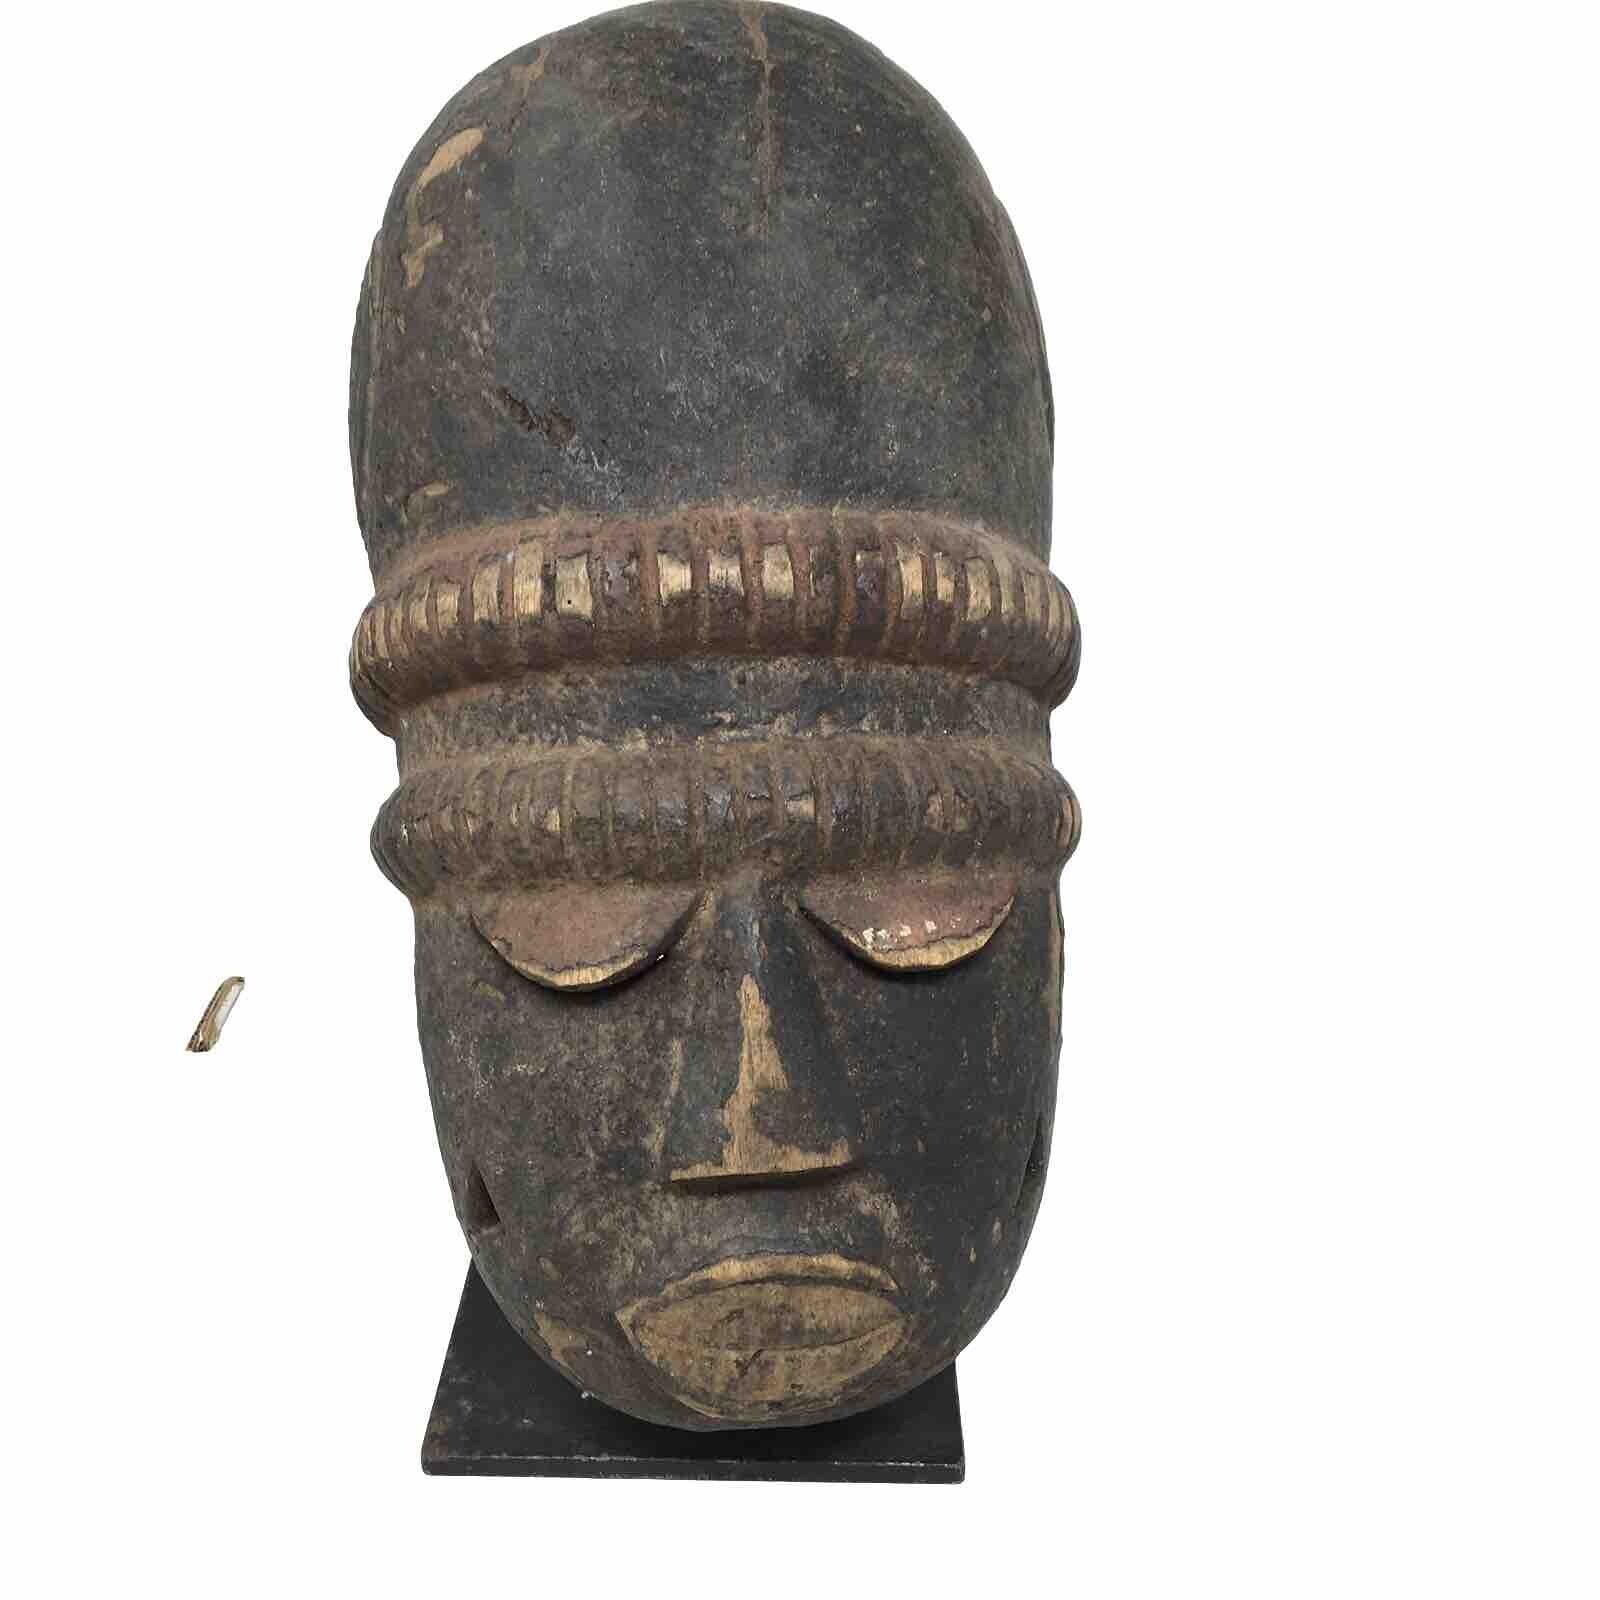 Antique West African Tribal Mask 13”x7” Carved Wood